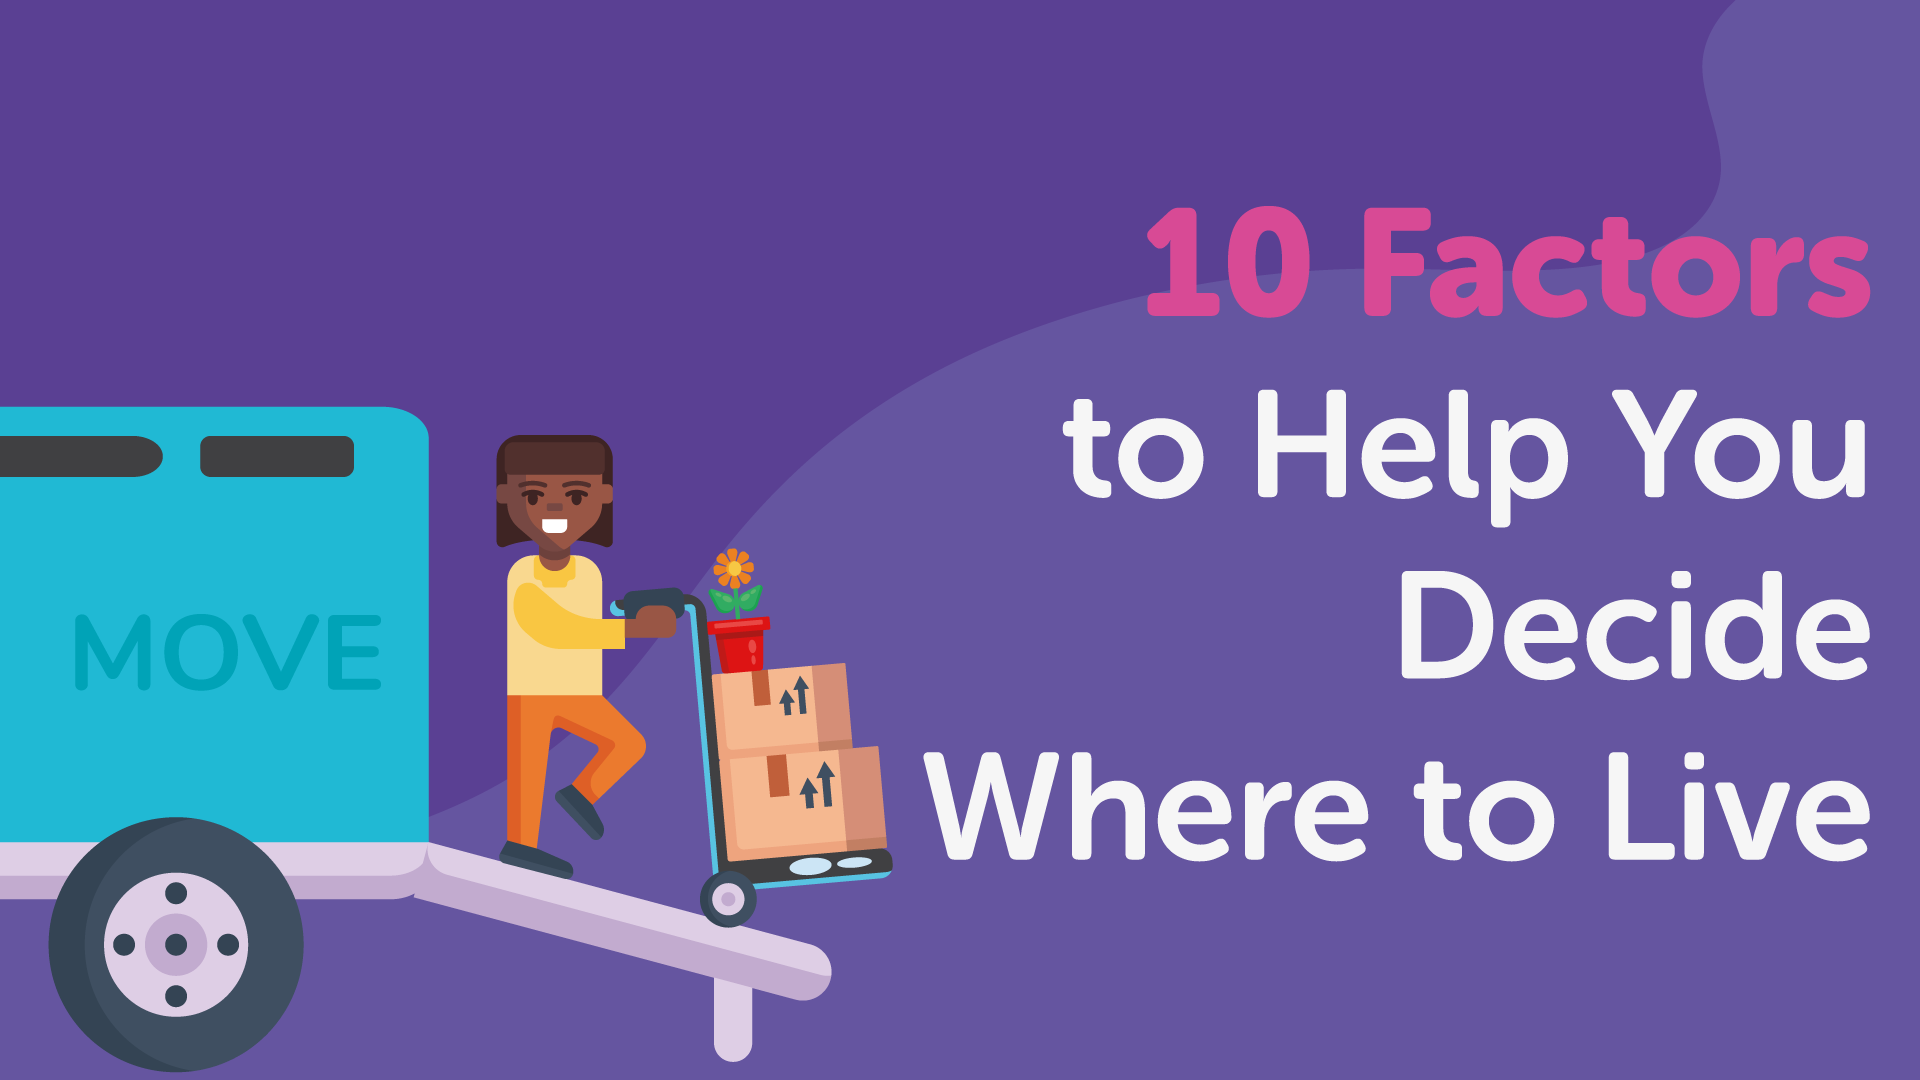 10 Factors to Decide Where to Live